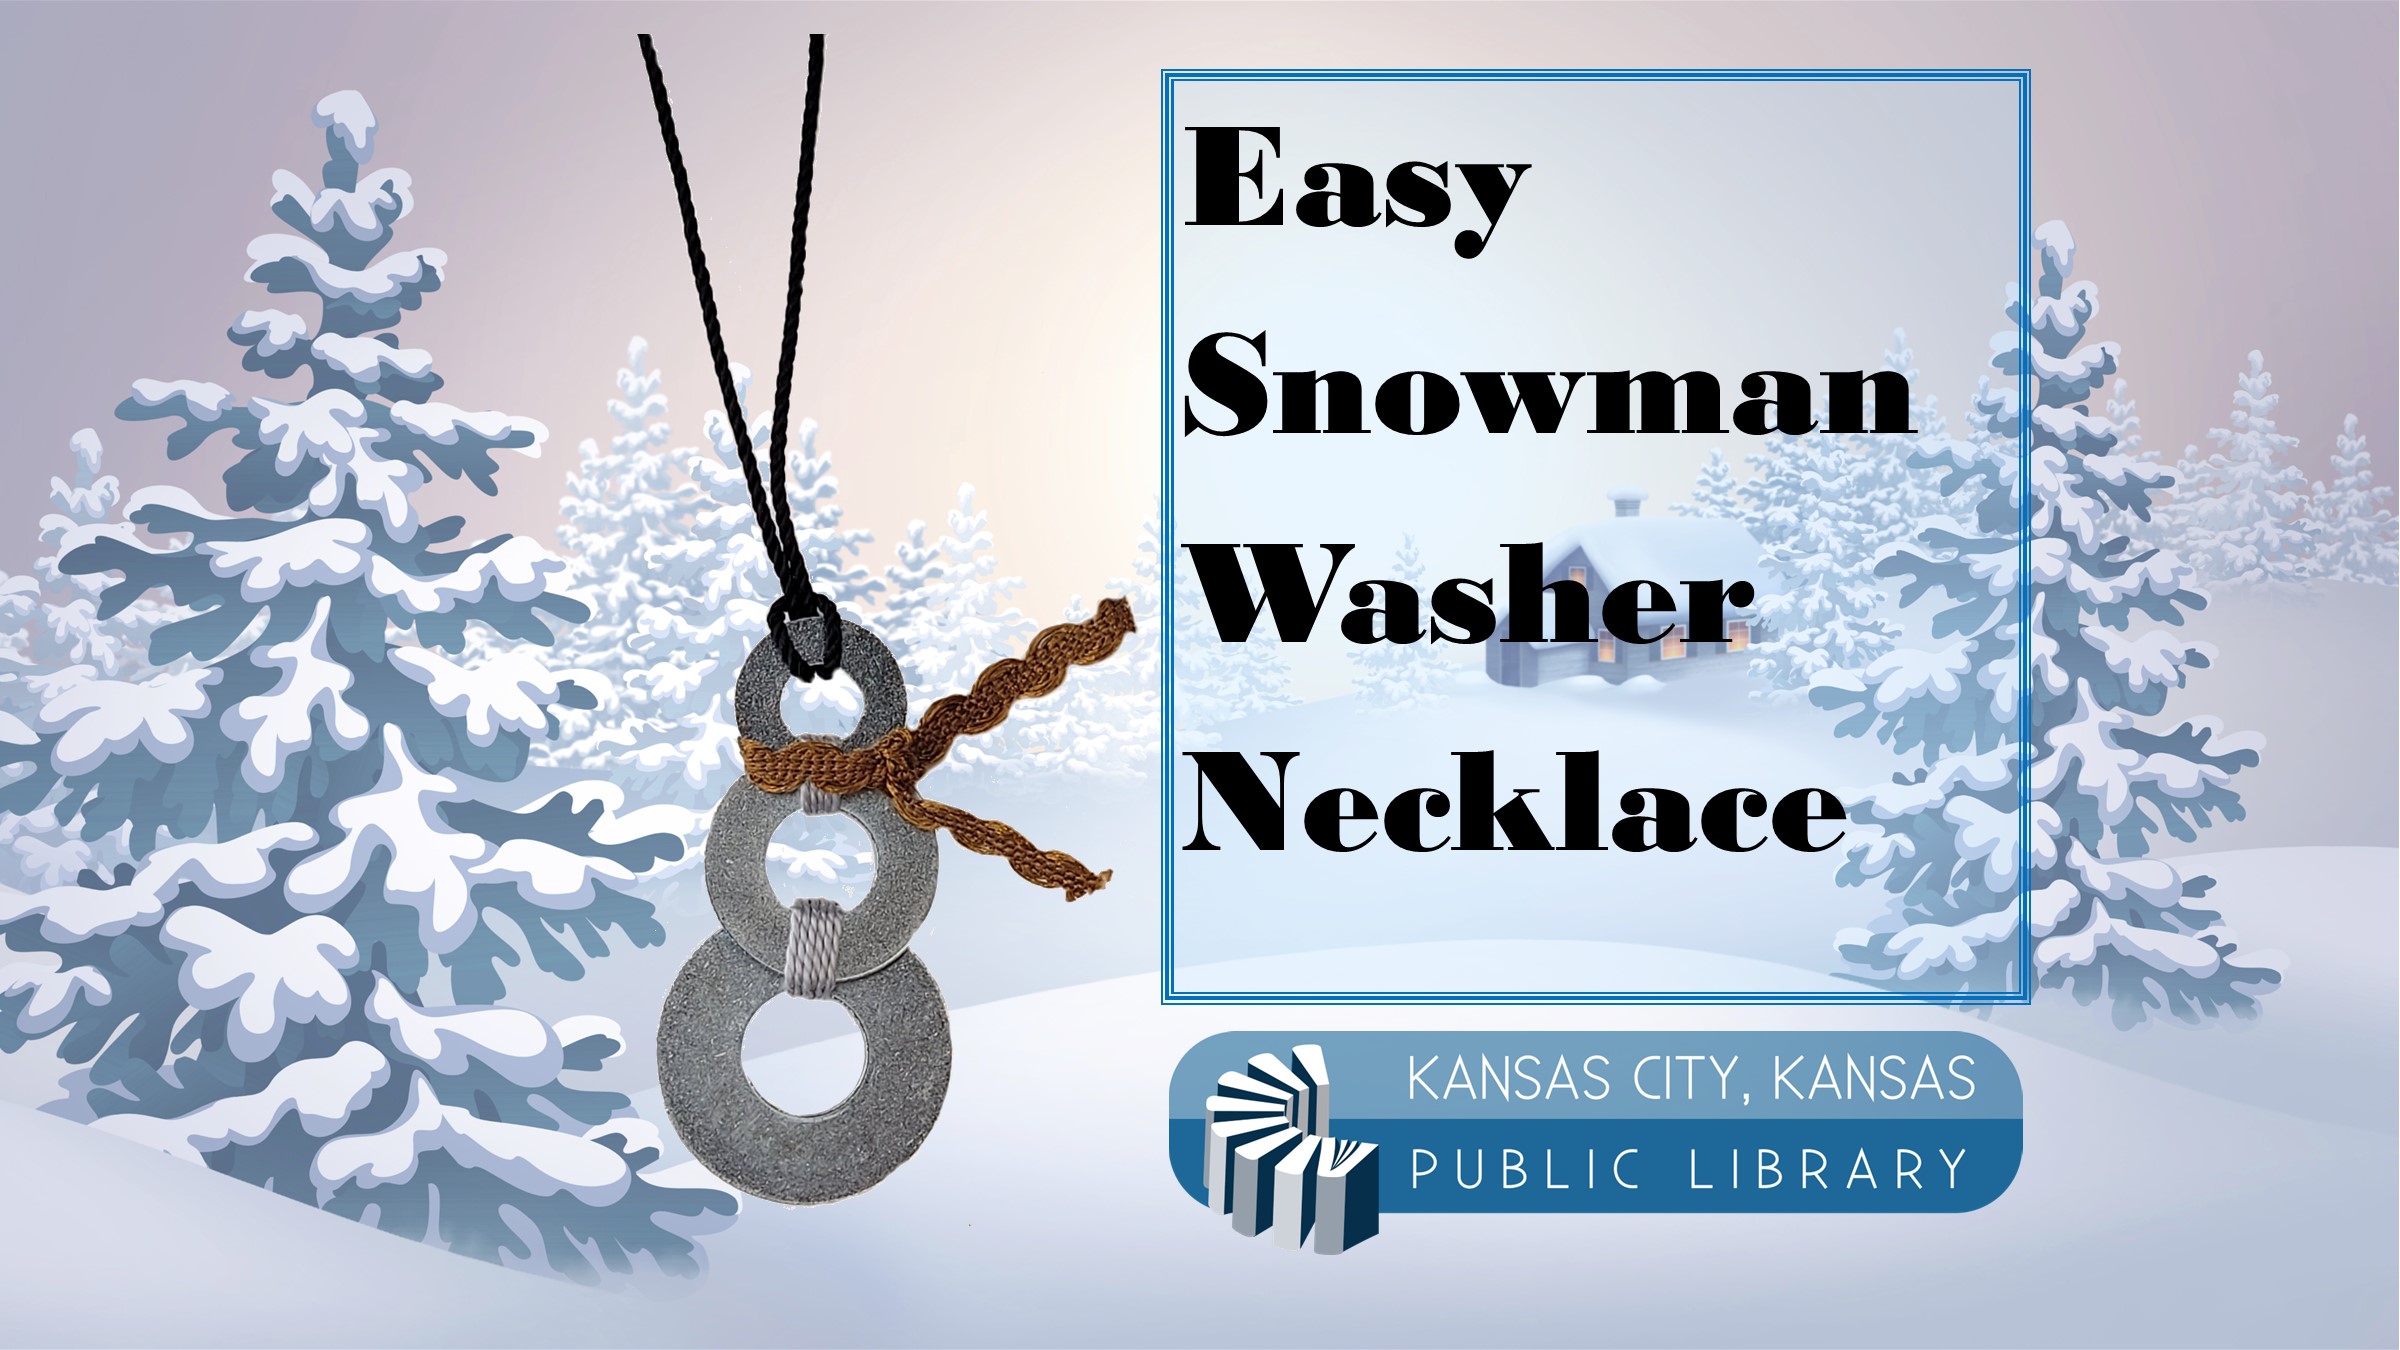 Easy snowman washer necklace